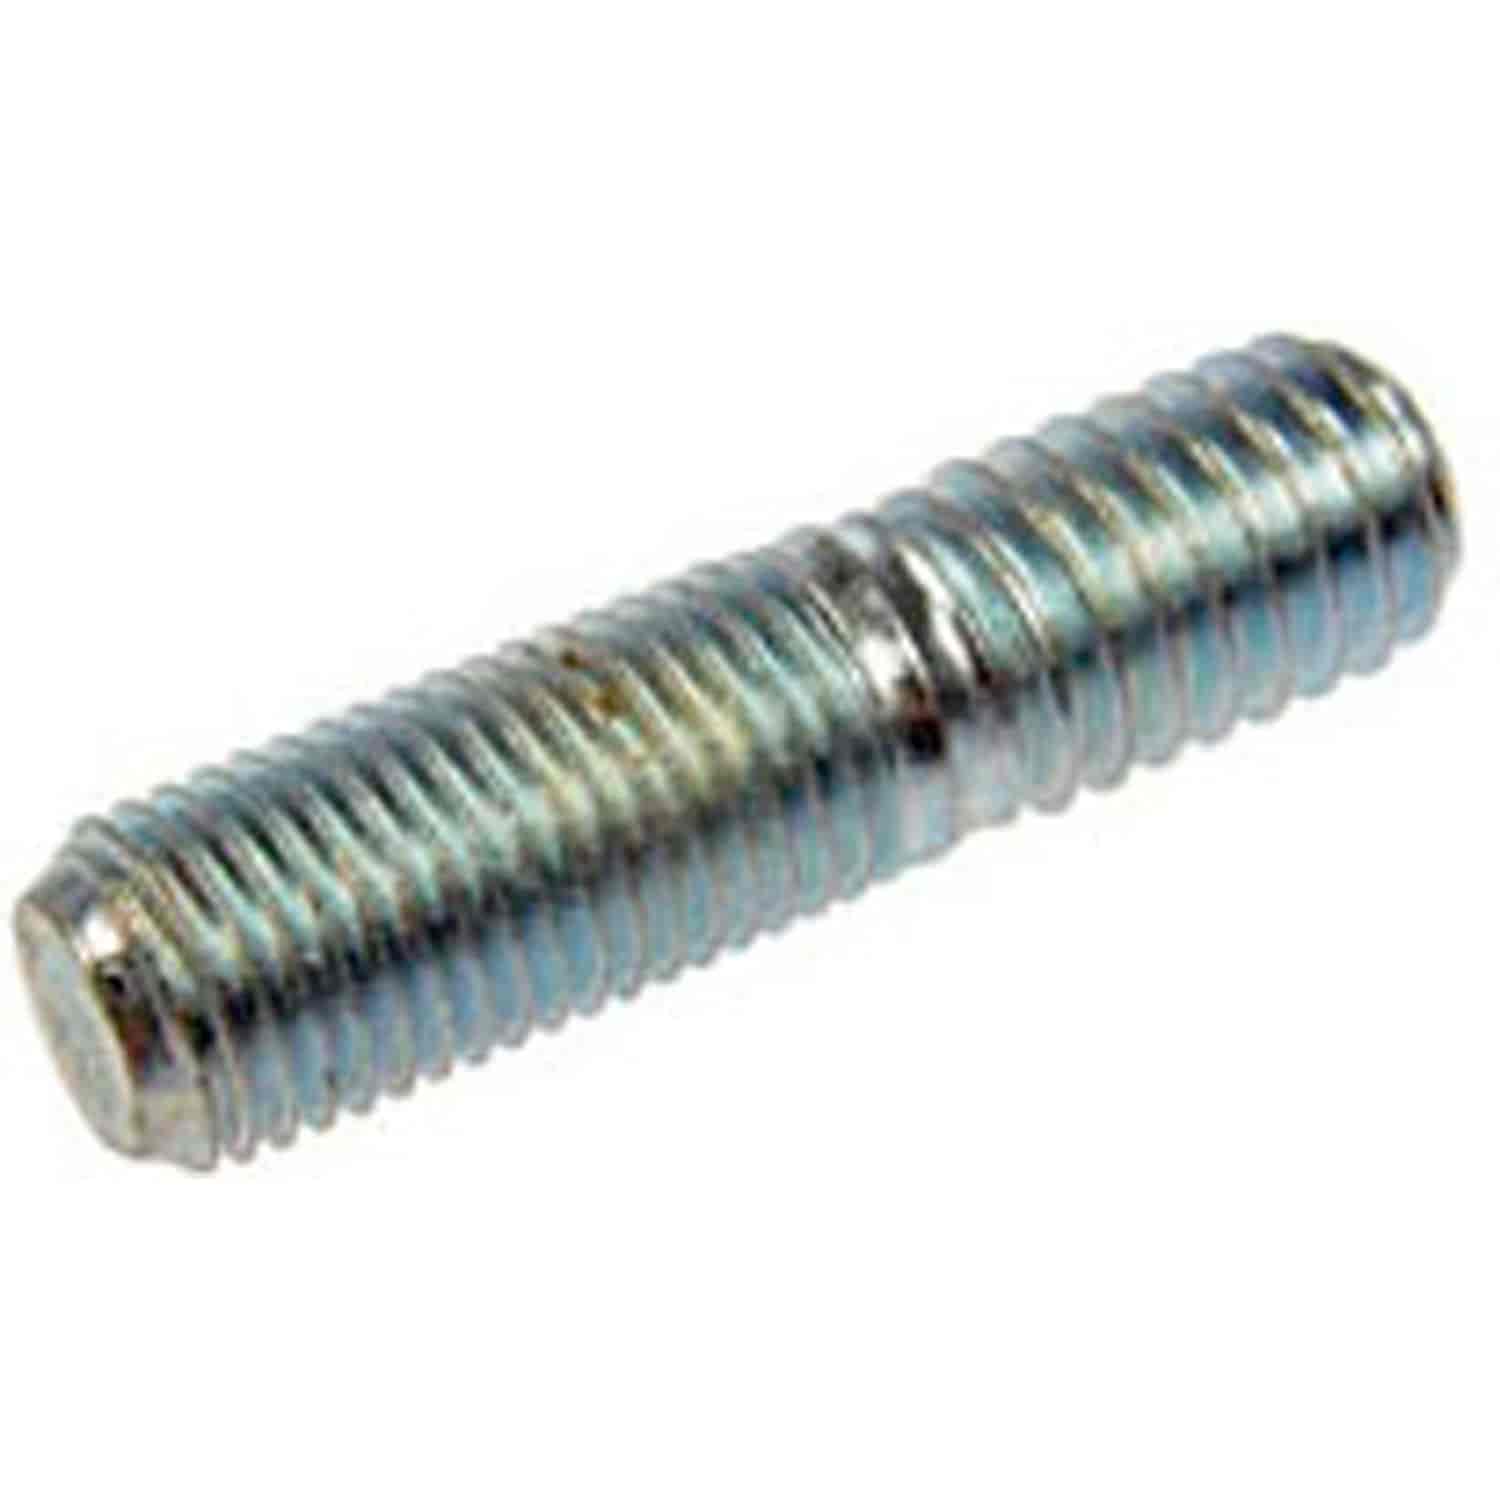 Double Ended Stud 3/8-16 x 1/2 in. / 3/8-24 x 3/4 in.